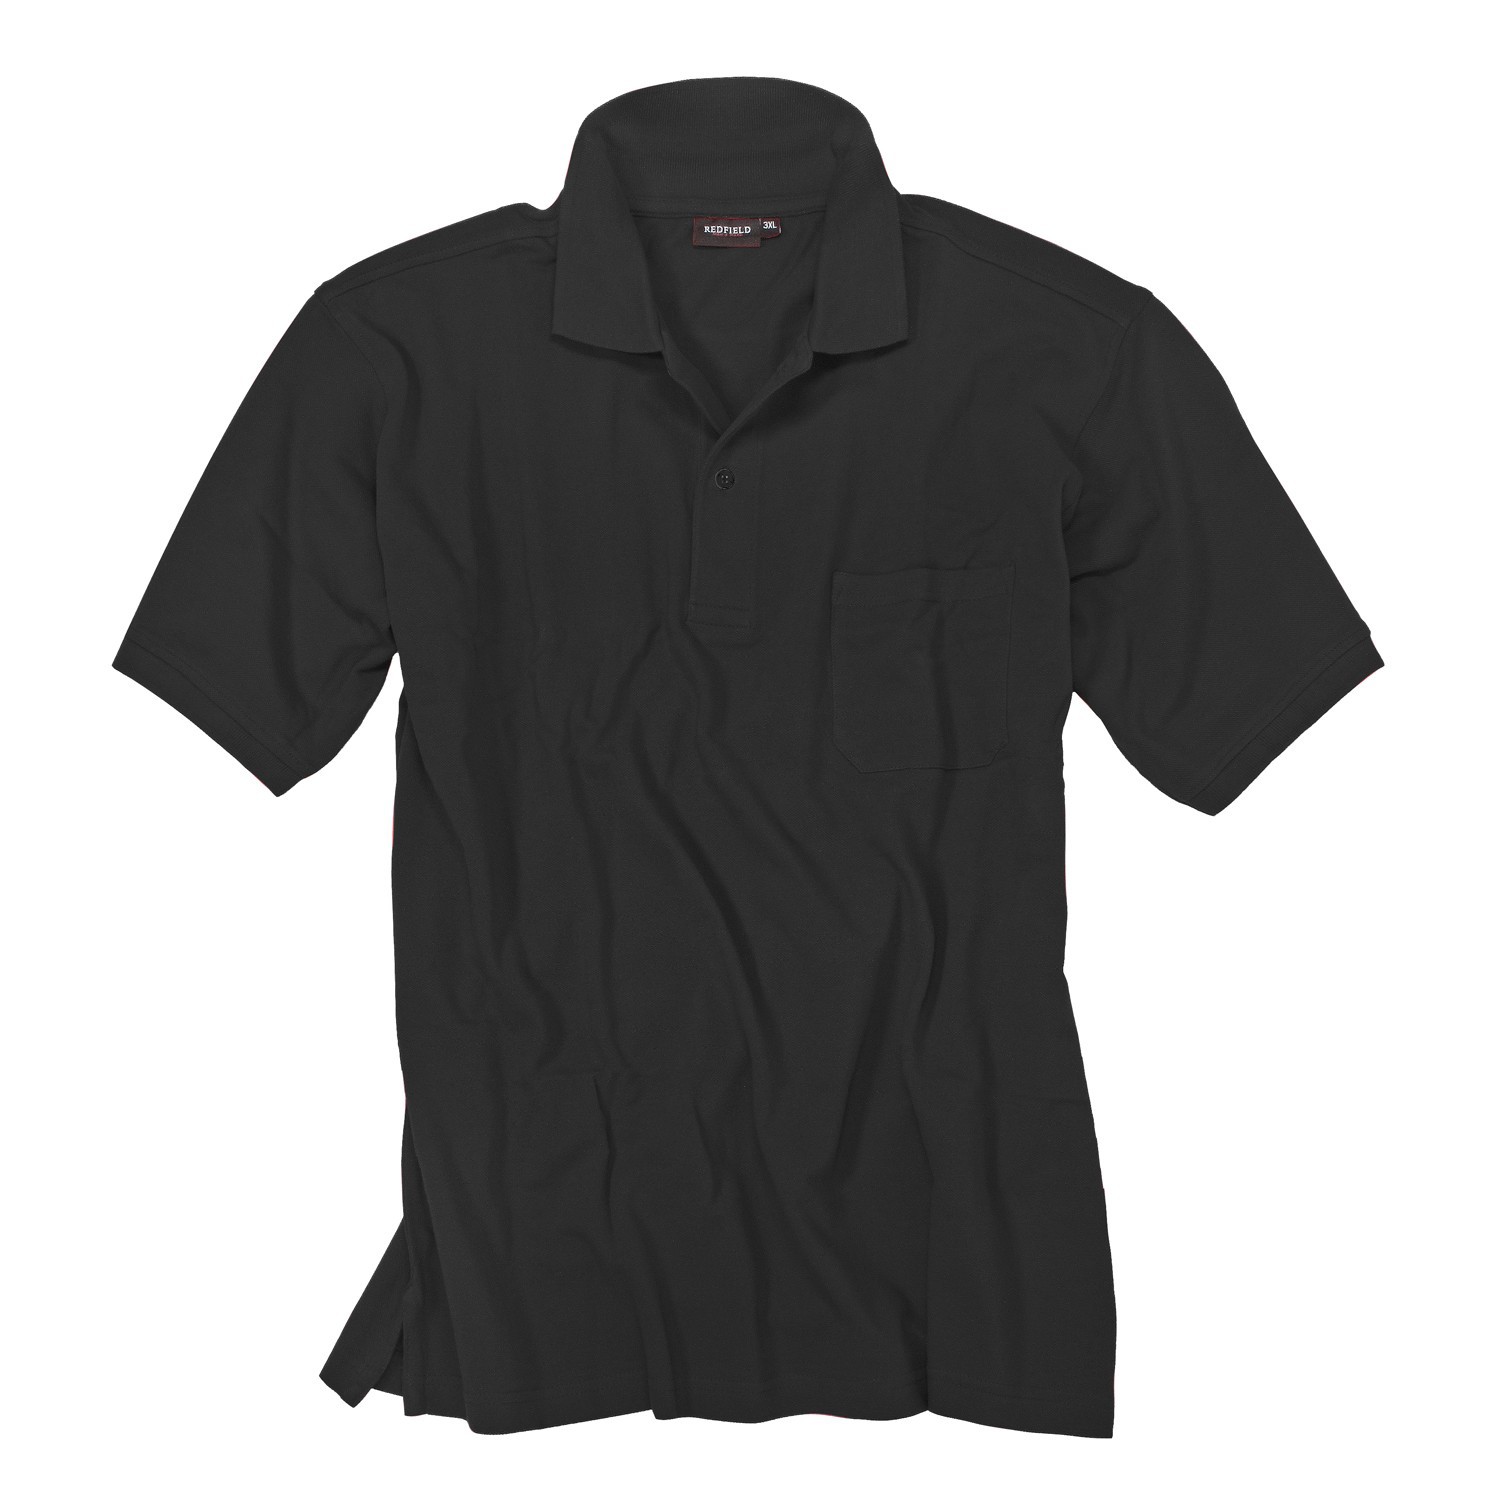 Black polo shirt by Redfield in oversizes up to 8XL